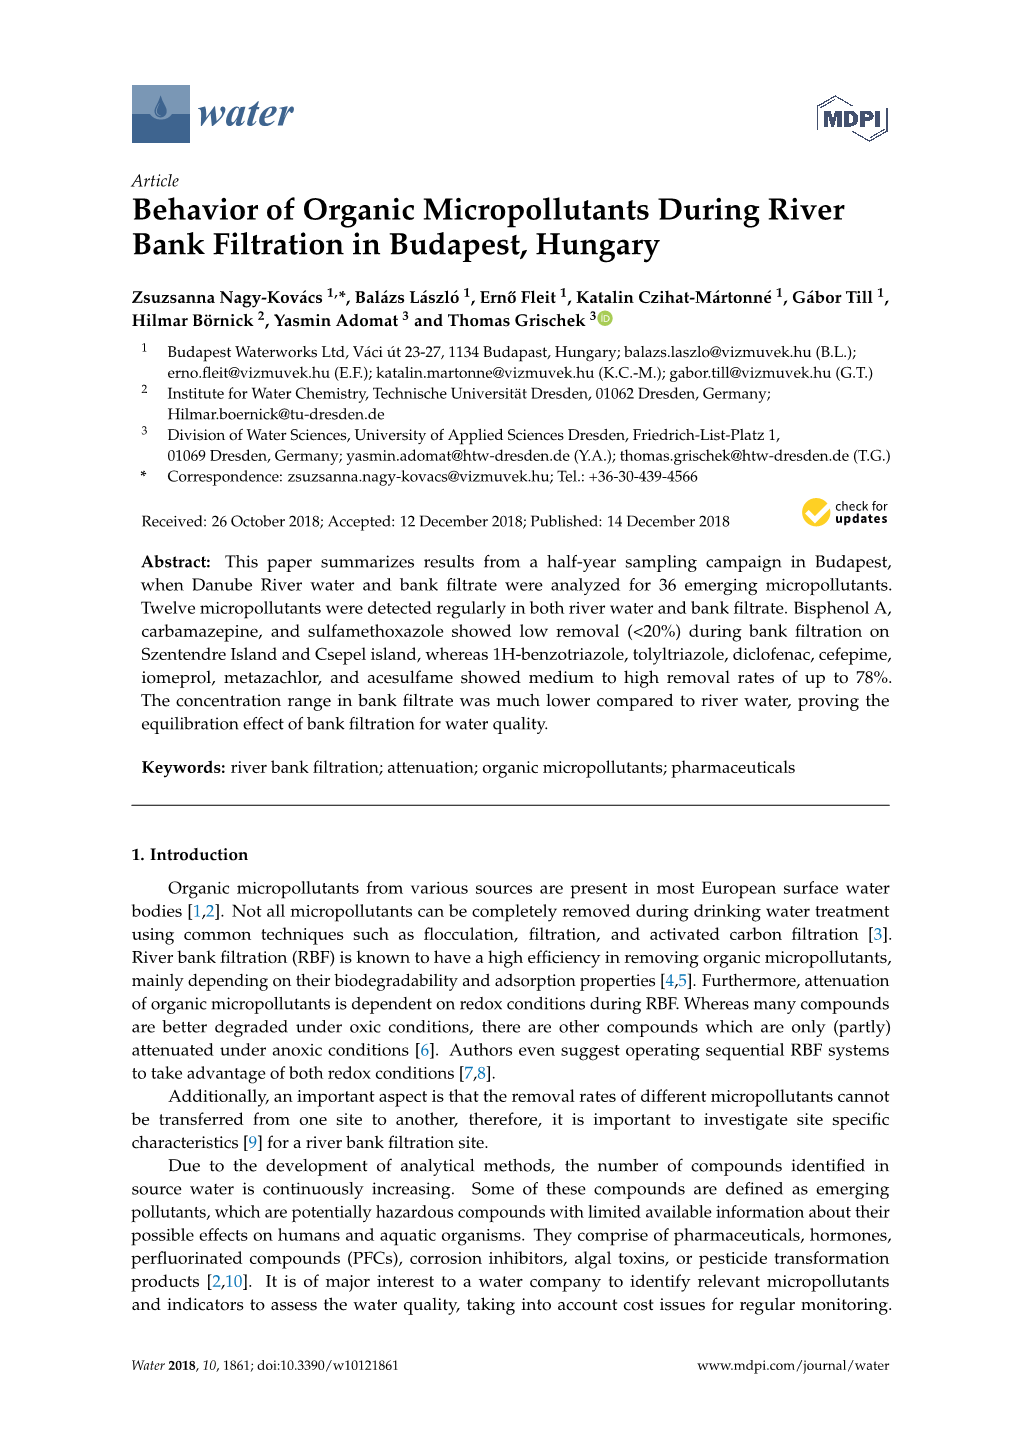 Behavior of Organic Micropollutants During River Bank Filtration in Budapest, Hungary